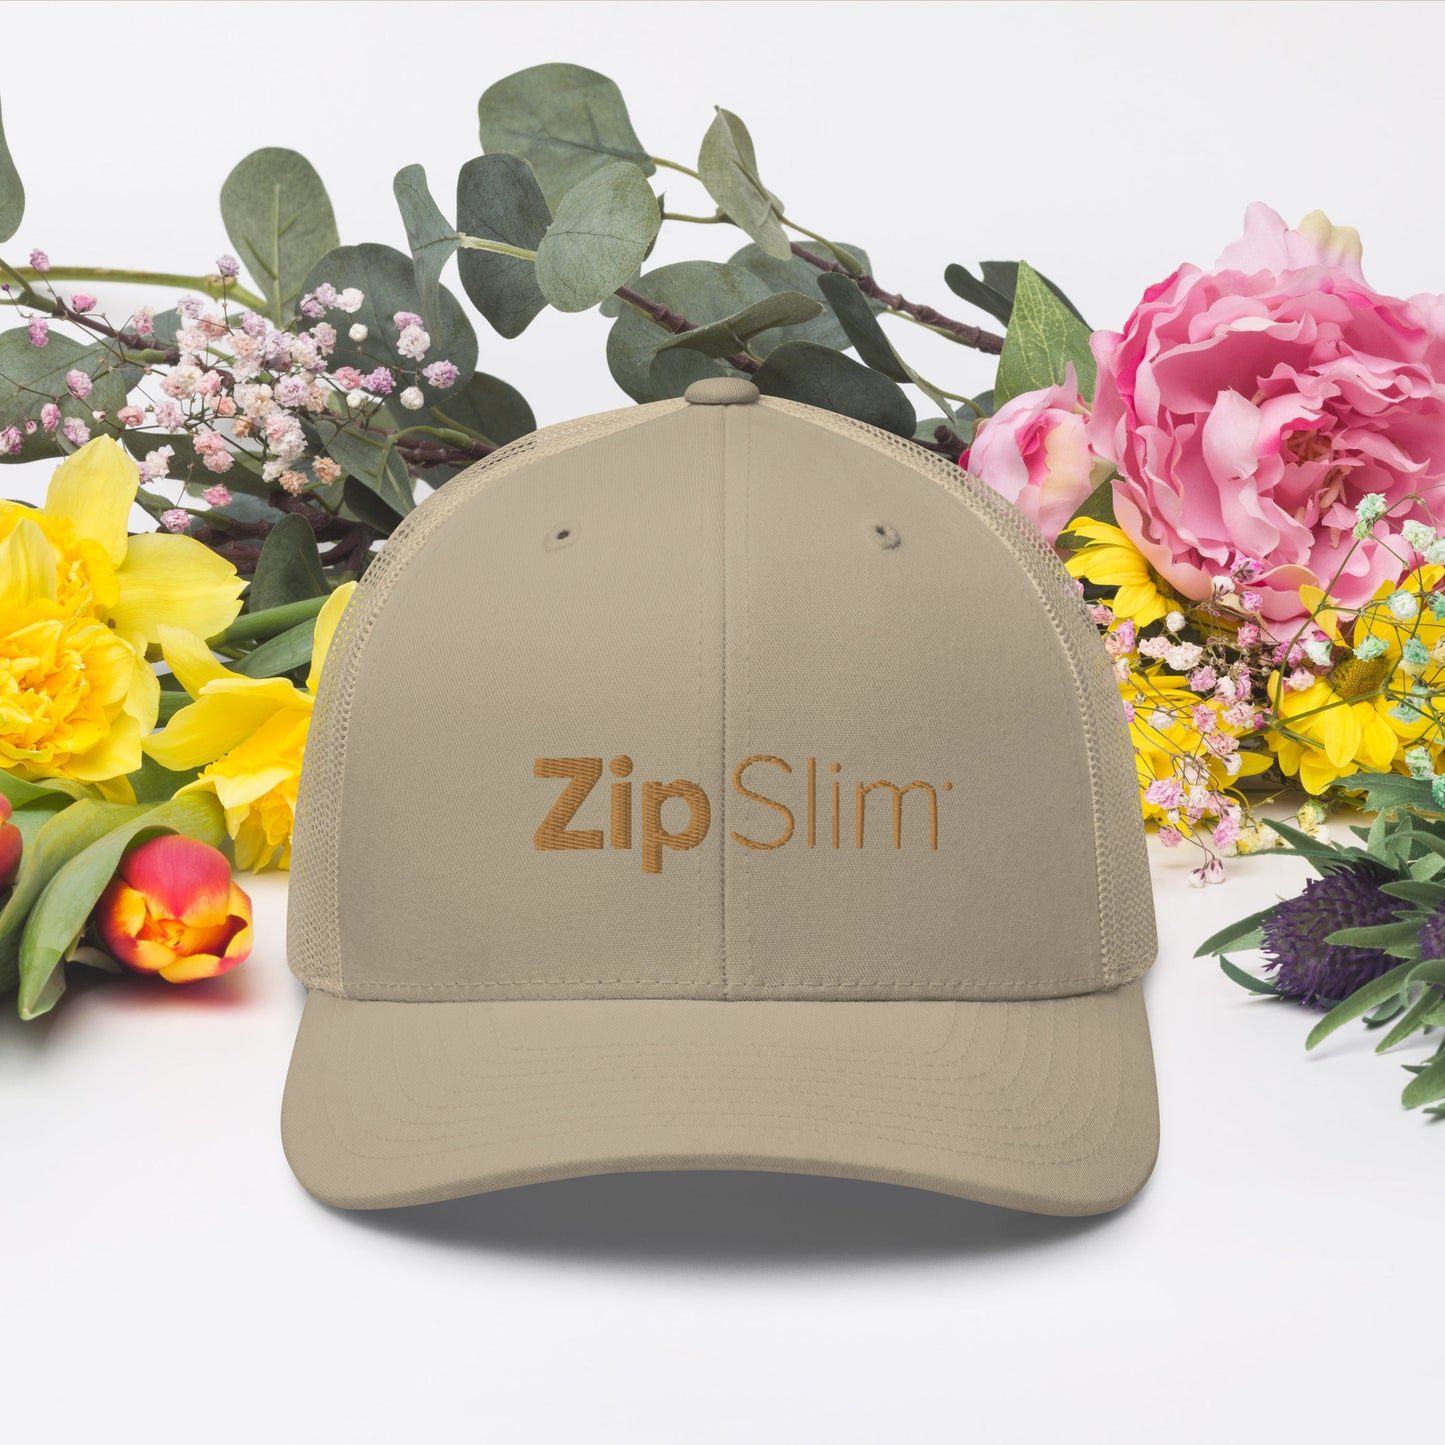 ZipSlim® Gold Embroidered Snap-back Trucker Cap